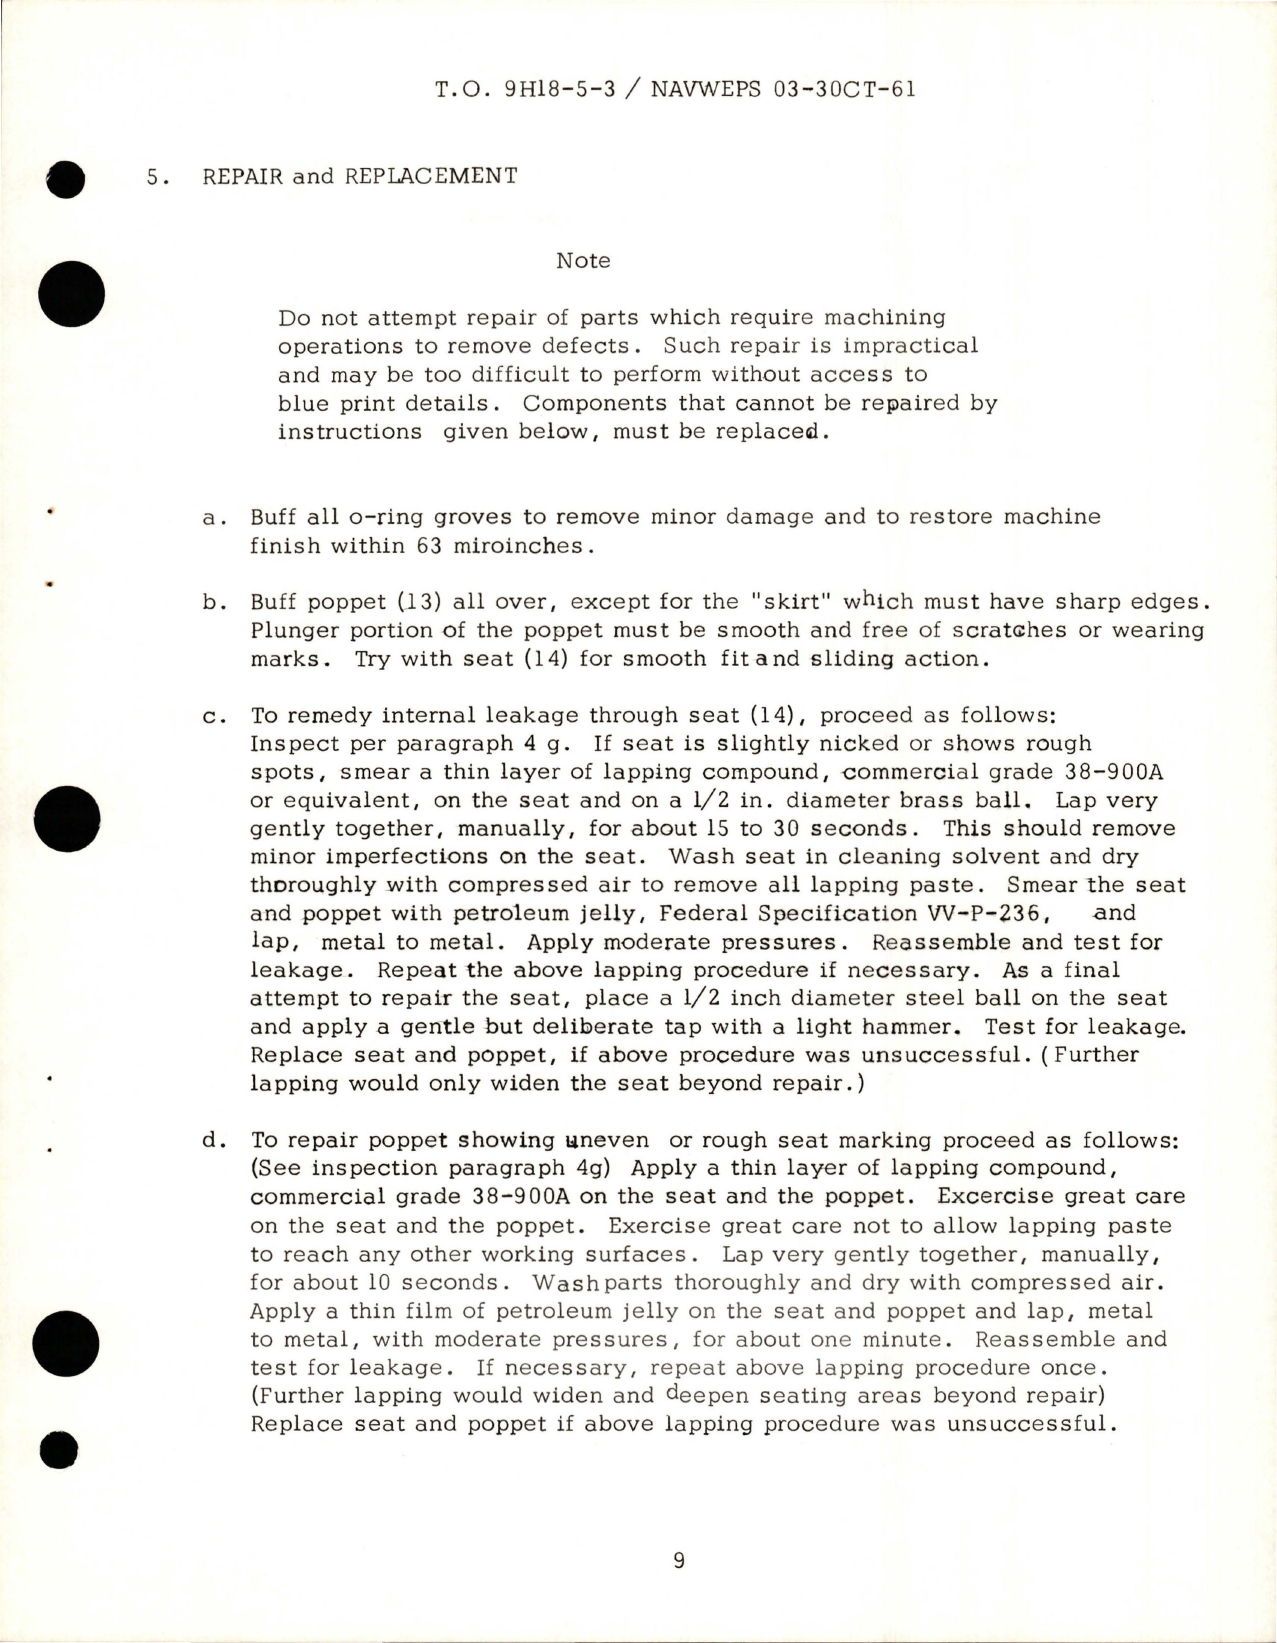 Sample page 9 from AirCorps Library document: Overhaul Instructions with Parts for Manifold Assembly w Pressure Relief and Check HYD - Parts 7A045-1 and 7A045-2